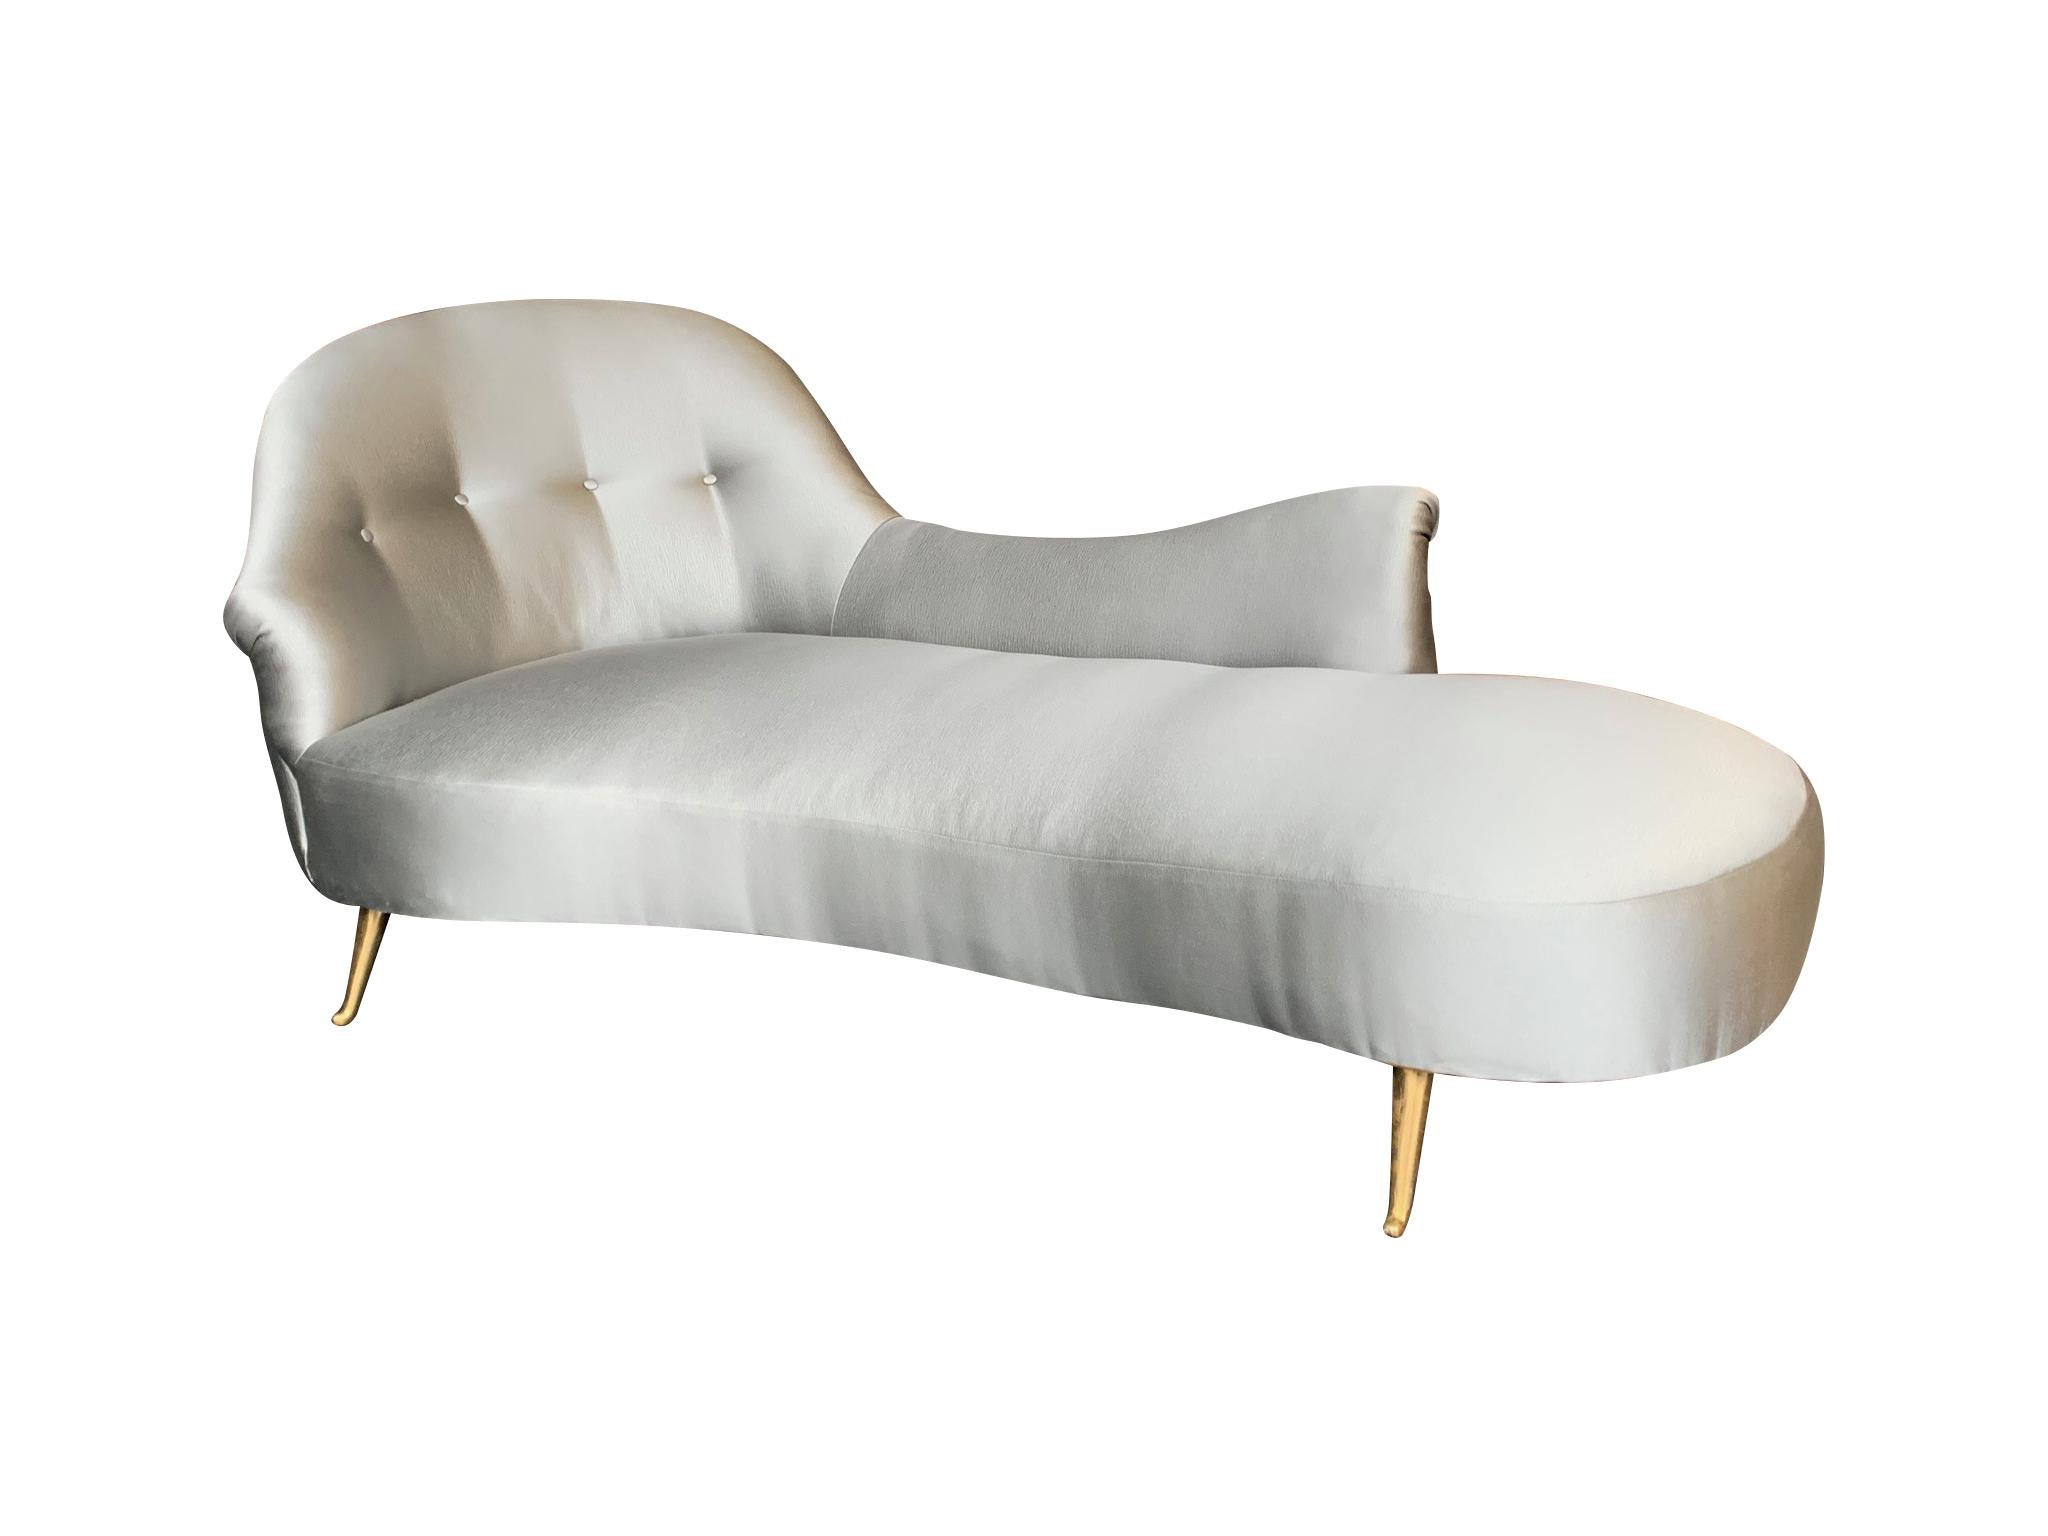 An Italian curved chaise lounge re-upholstered in silver grey fabric with button back and brass curved feet.